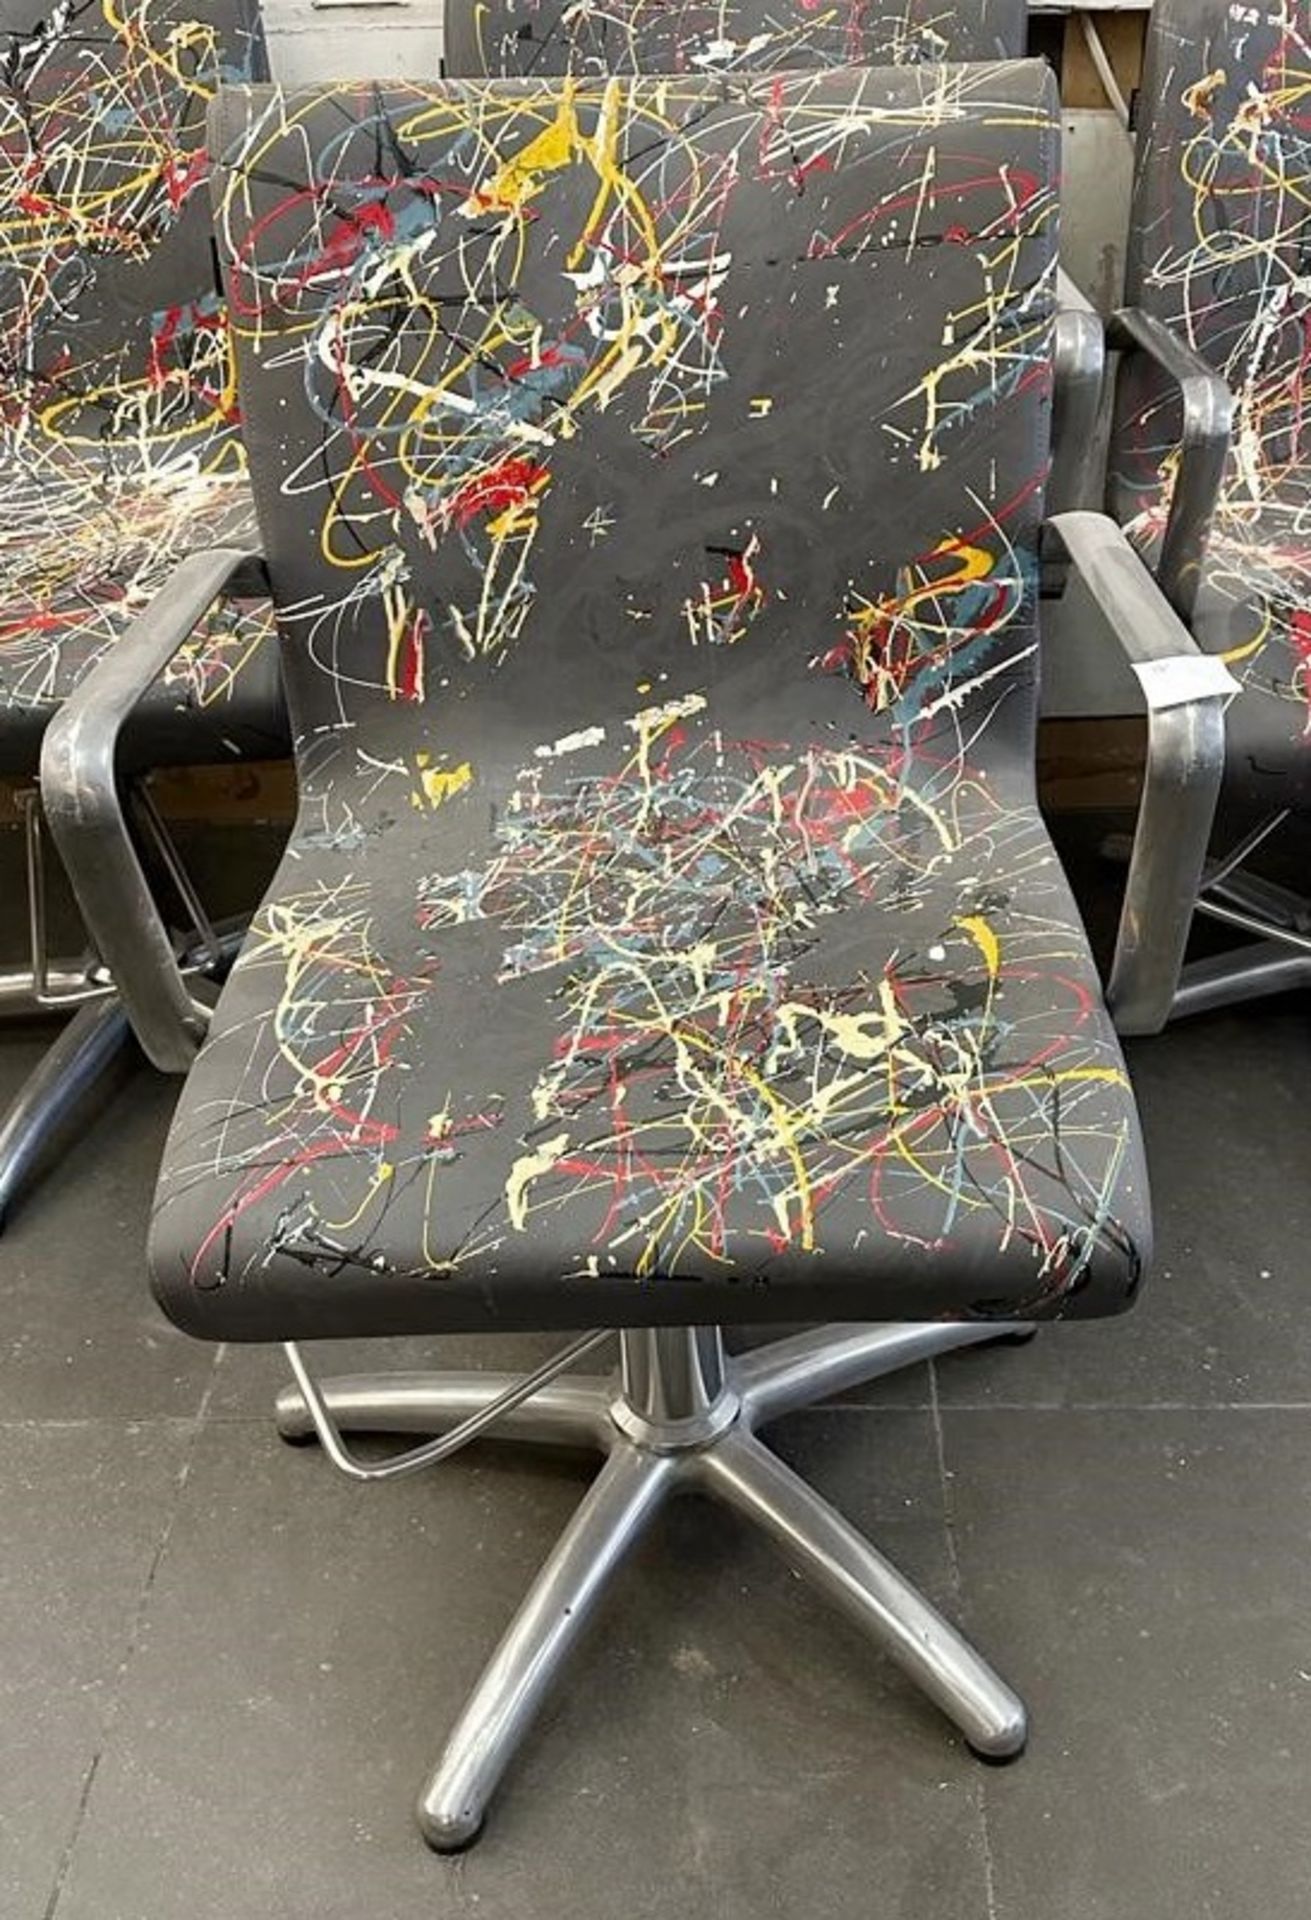 1 x REM Leather Stylist Chair Featuring Especially Commissioned Abstract Paintwork By A Renowned